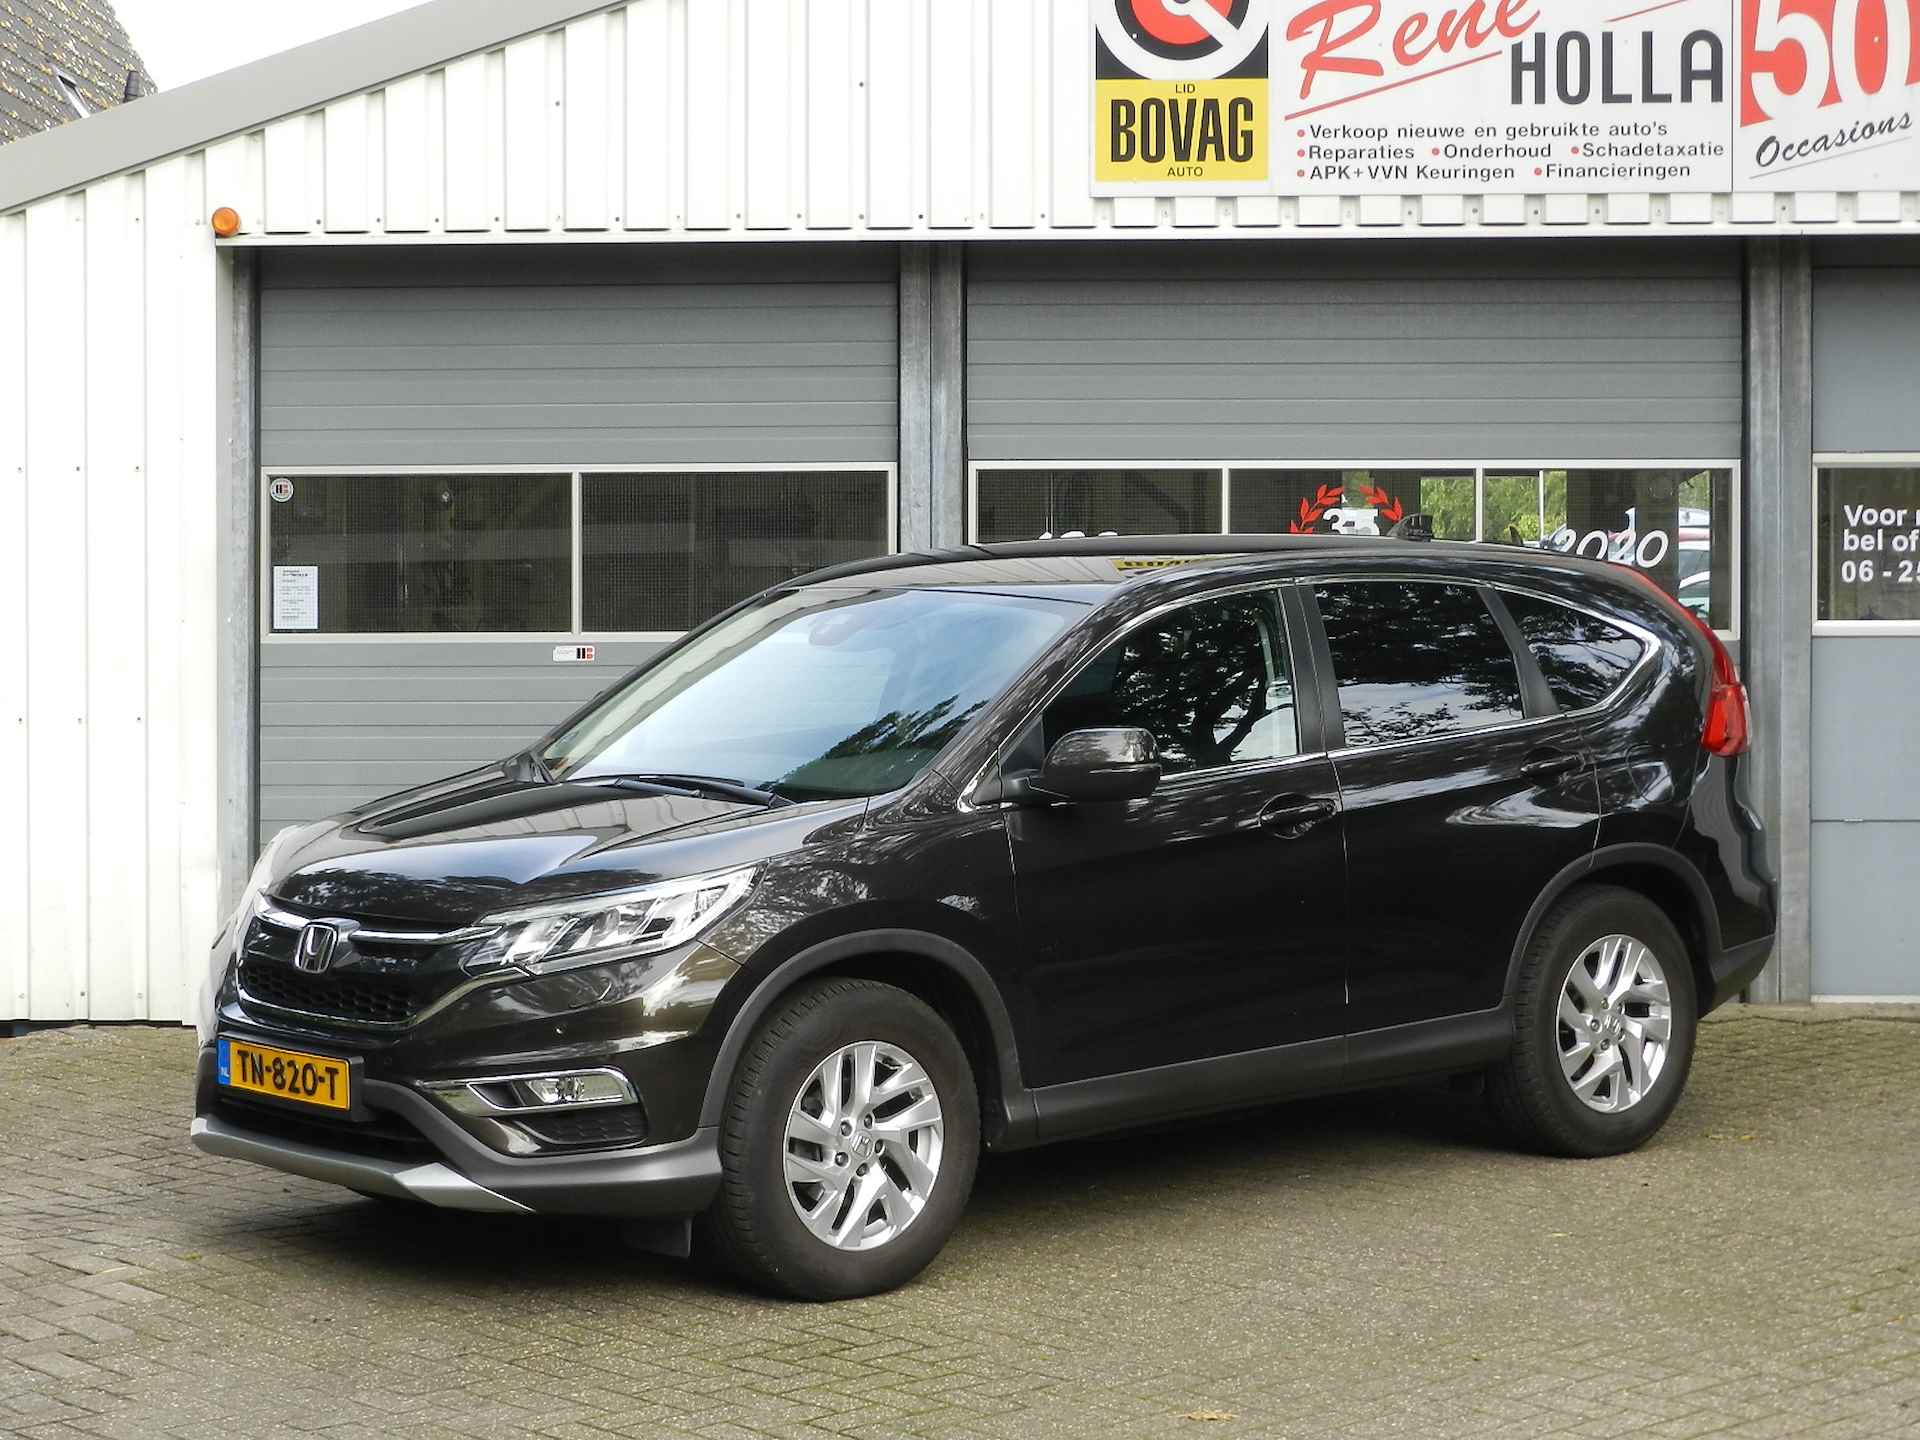 Honda CR-V 2.0 4WD Lifestyle Automaat Climate en Cruise contr PDC Camera - 5/50